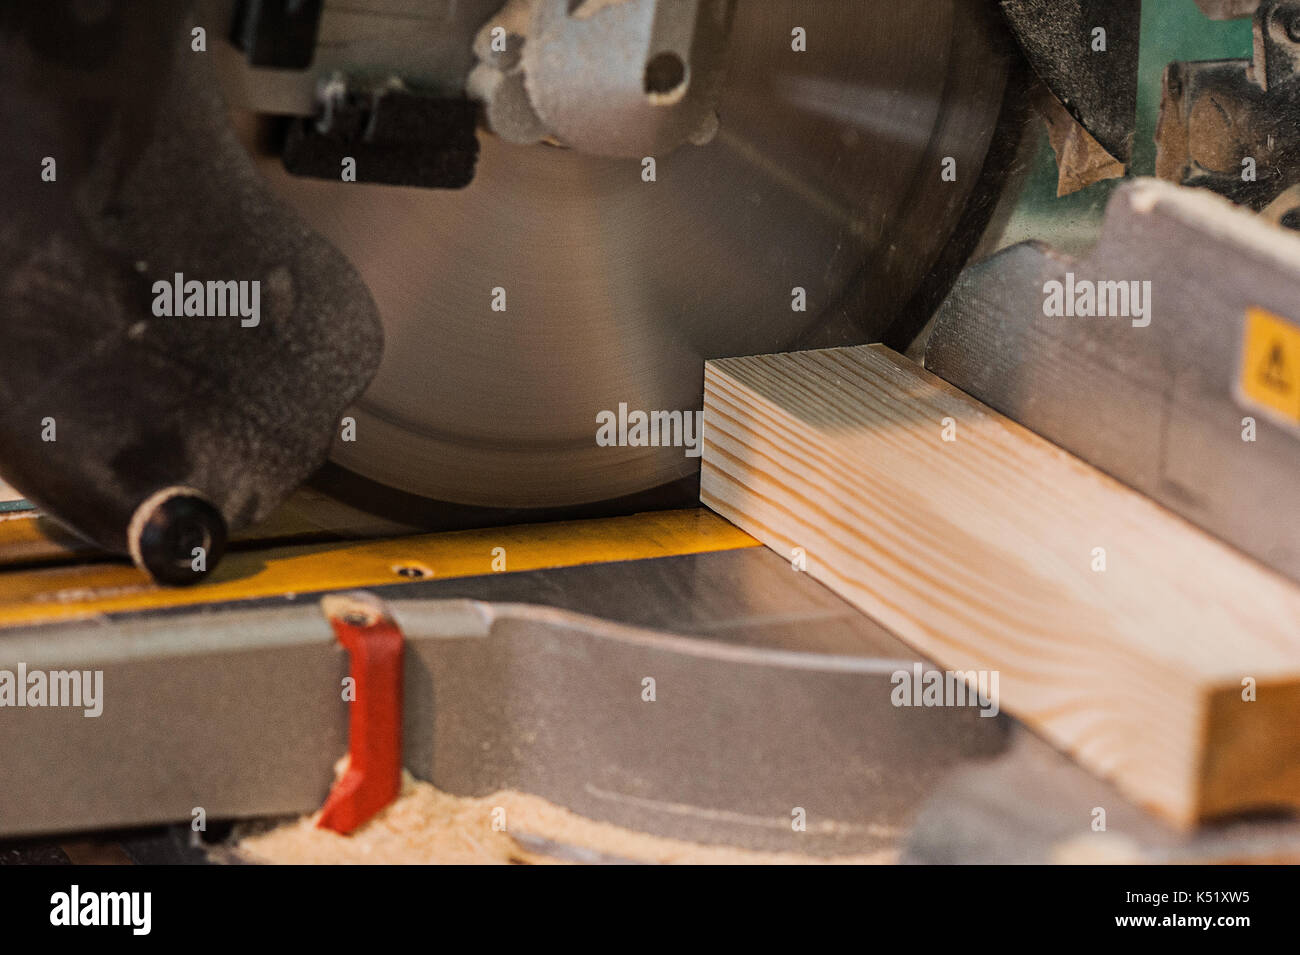 Circular saw with a wooden beam and measuring scale. Sawing a wooden beam with a circular saw. abother view close up Stock Photo